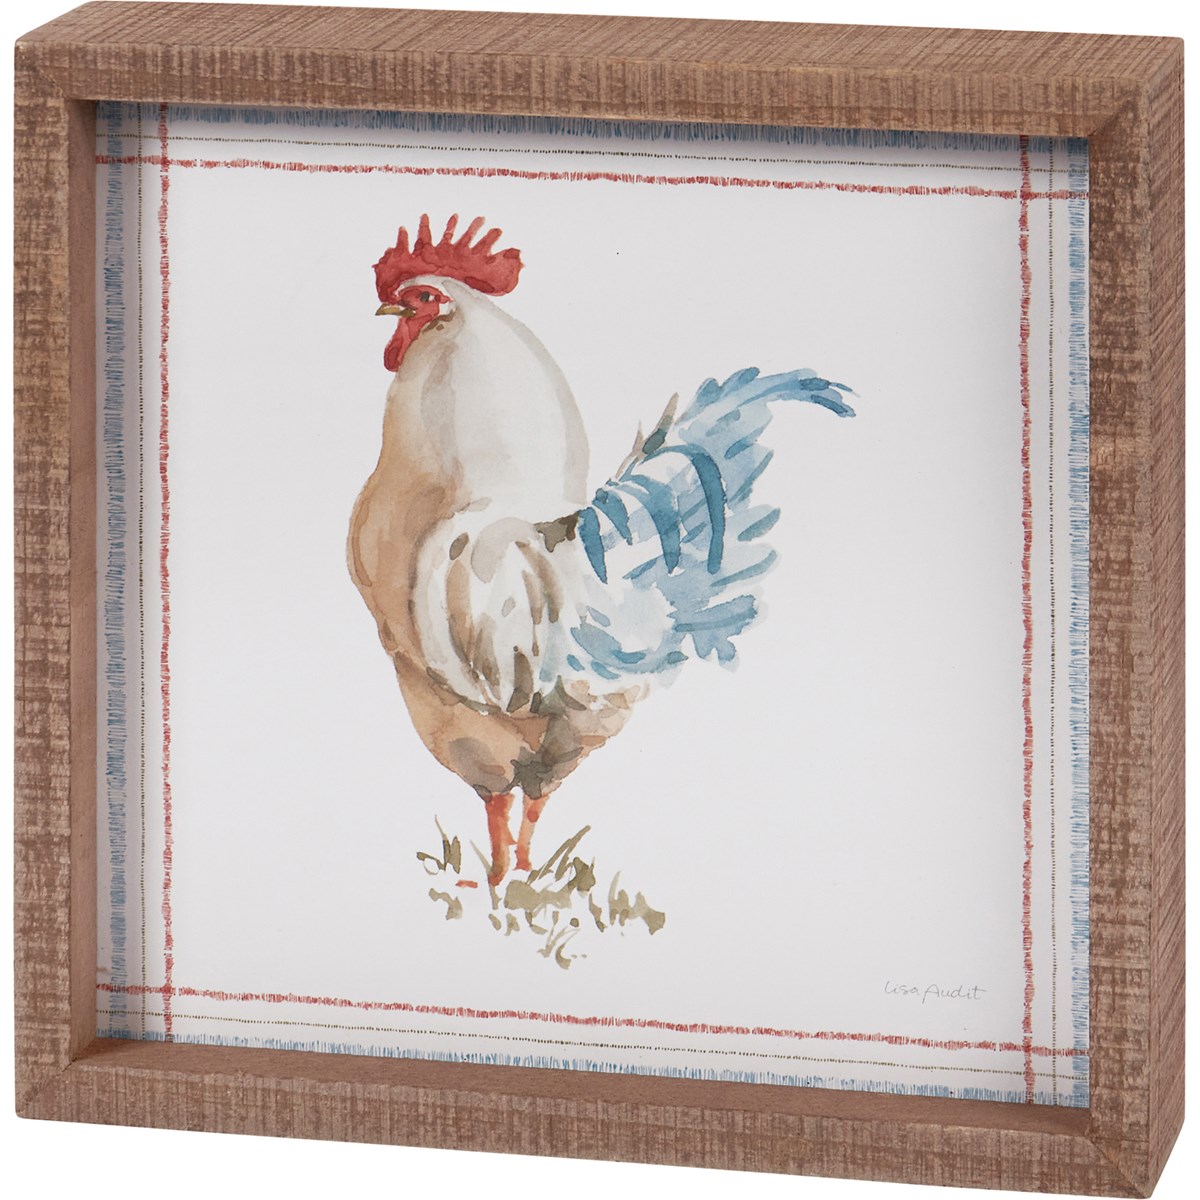 Rooster Inset Box Sign - Wood, Paper